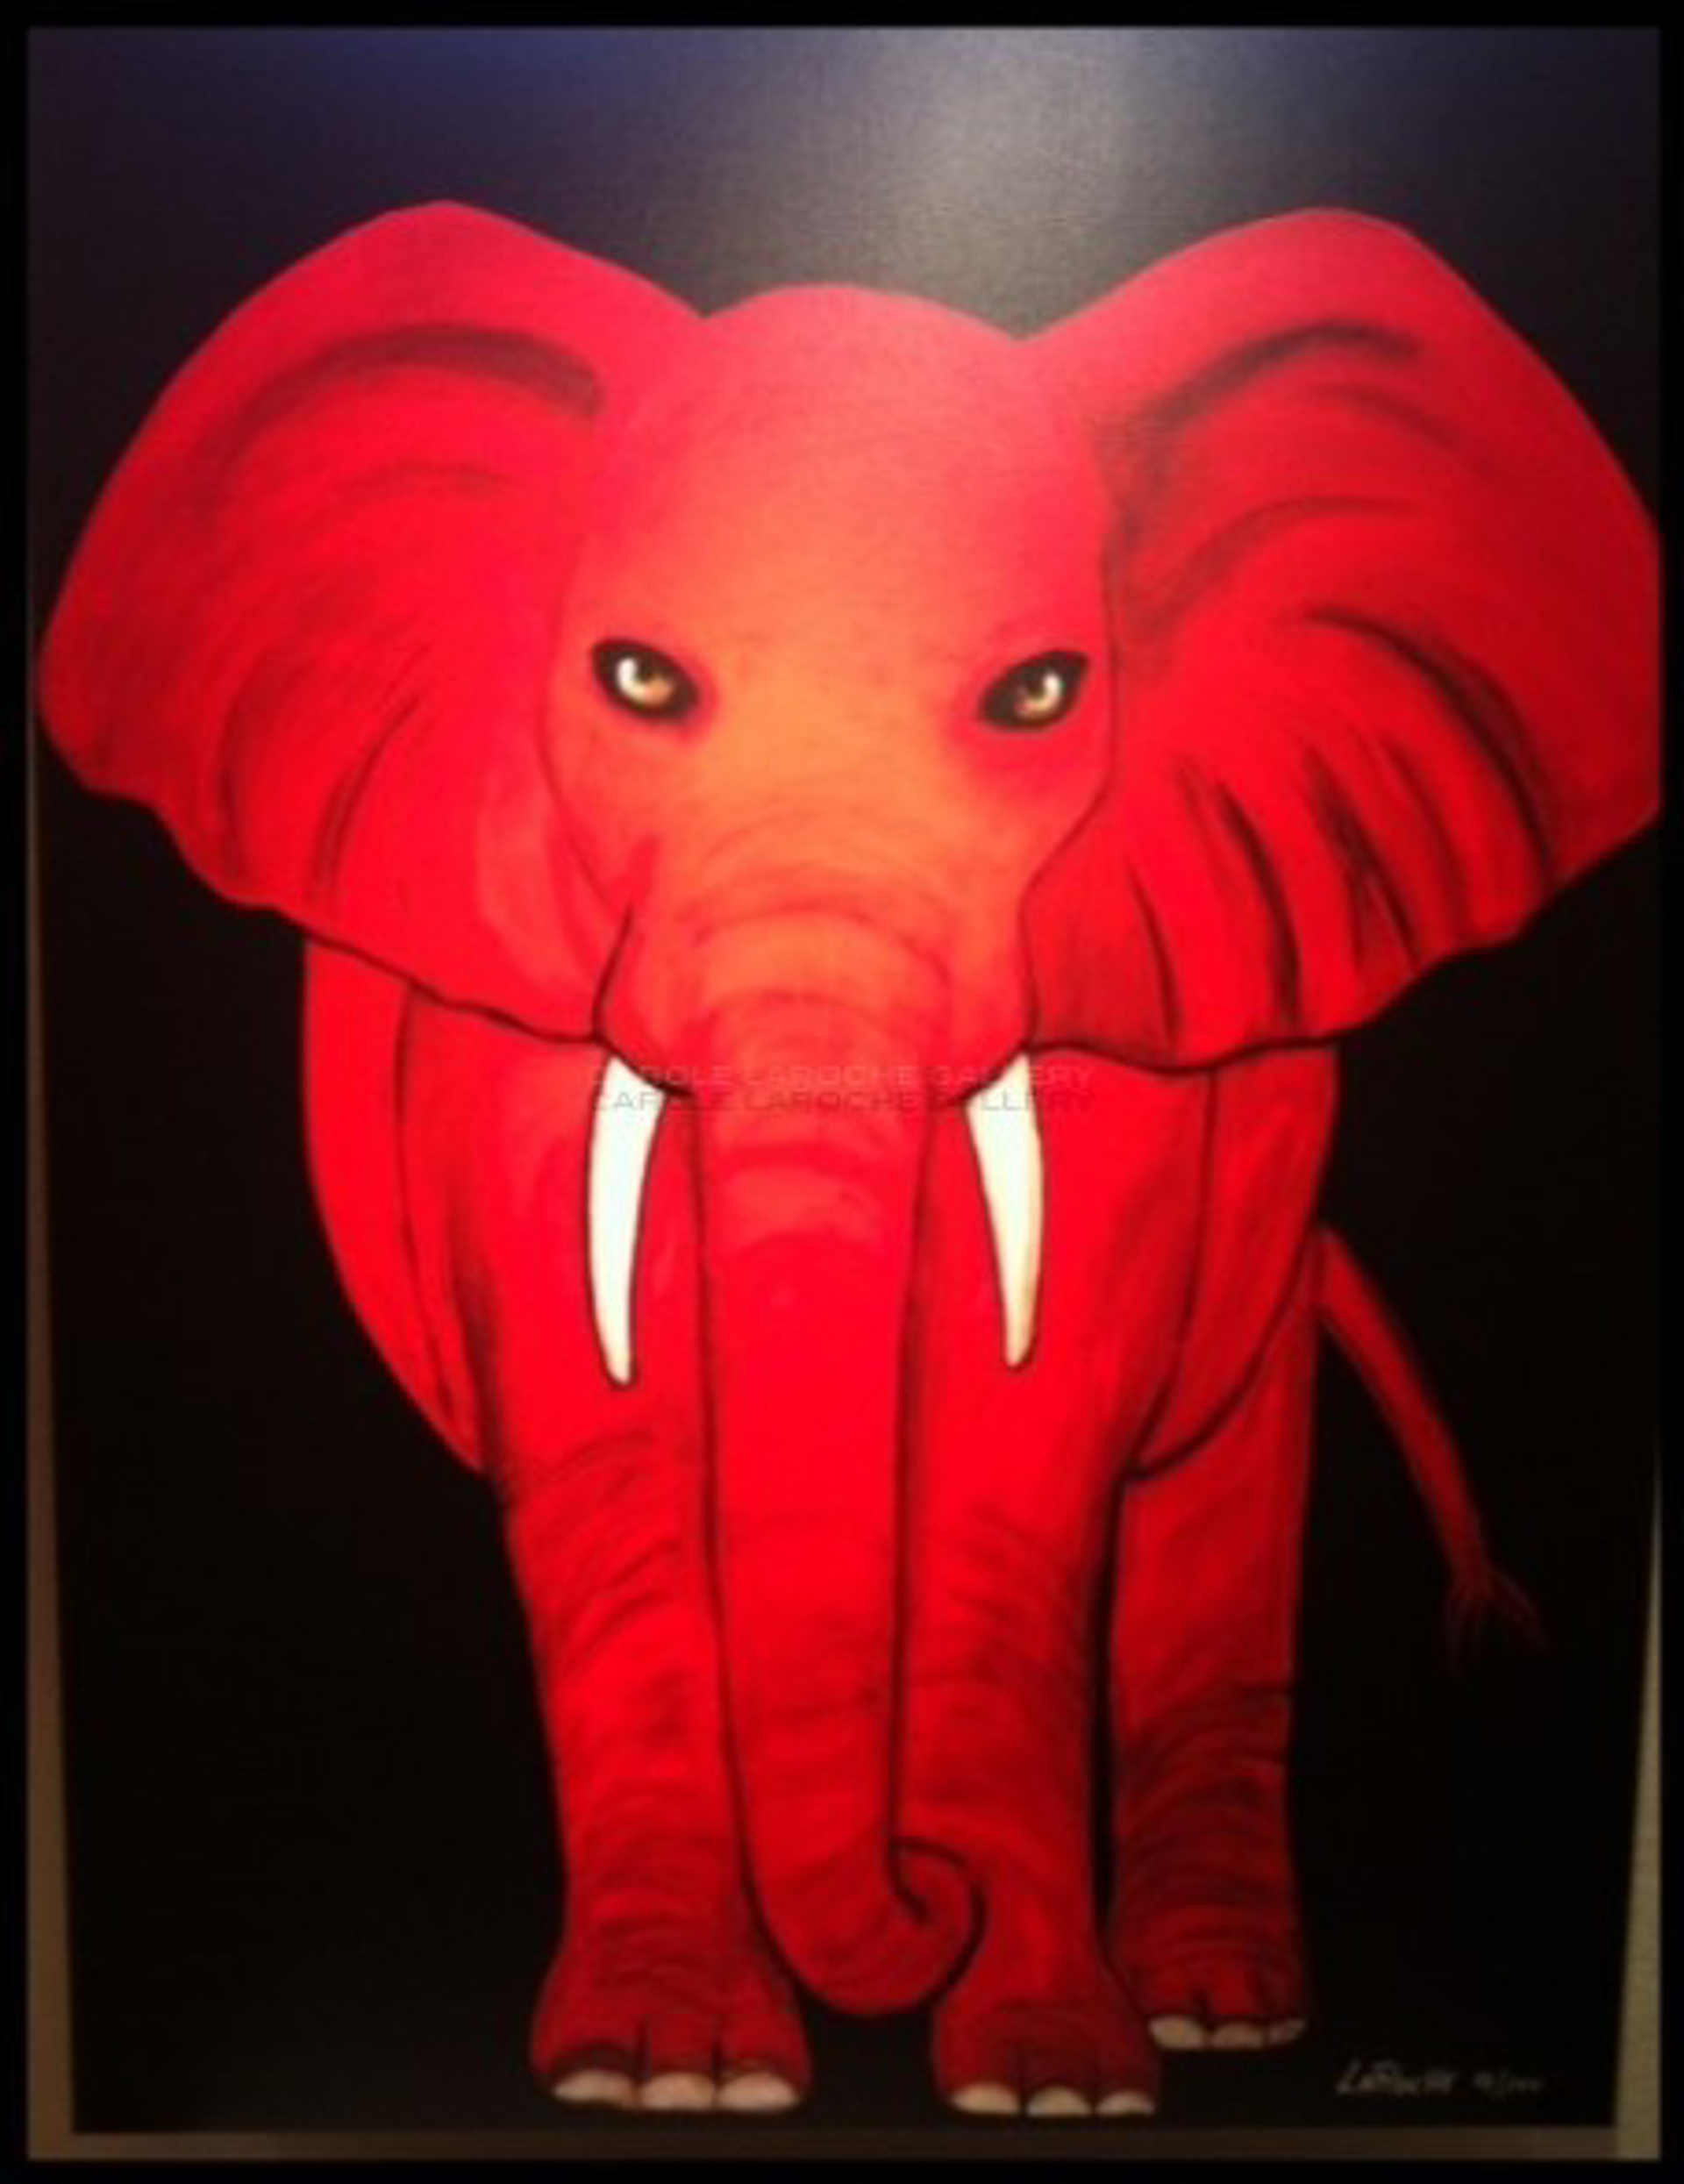 RED ELEPHANT - limited edition giclee on canvas 54"x40" by Carole LaRoche